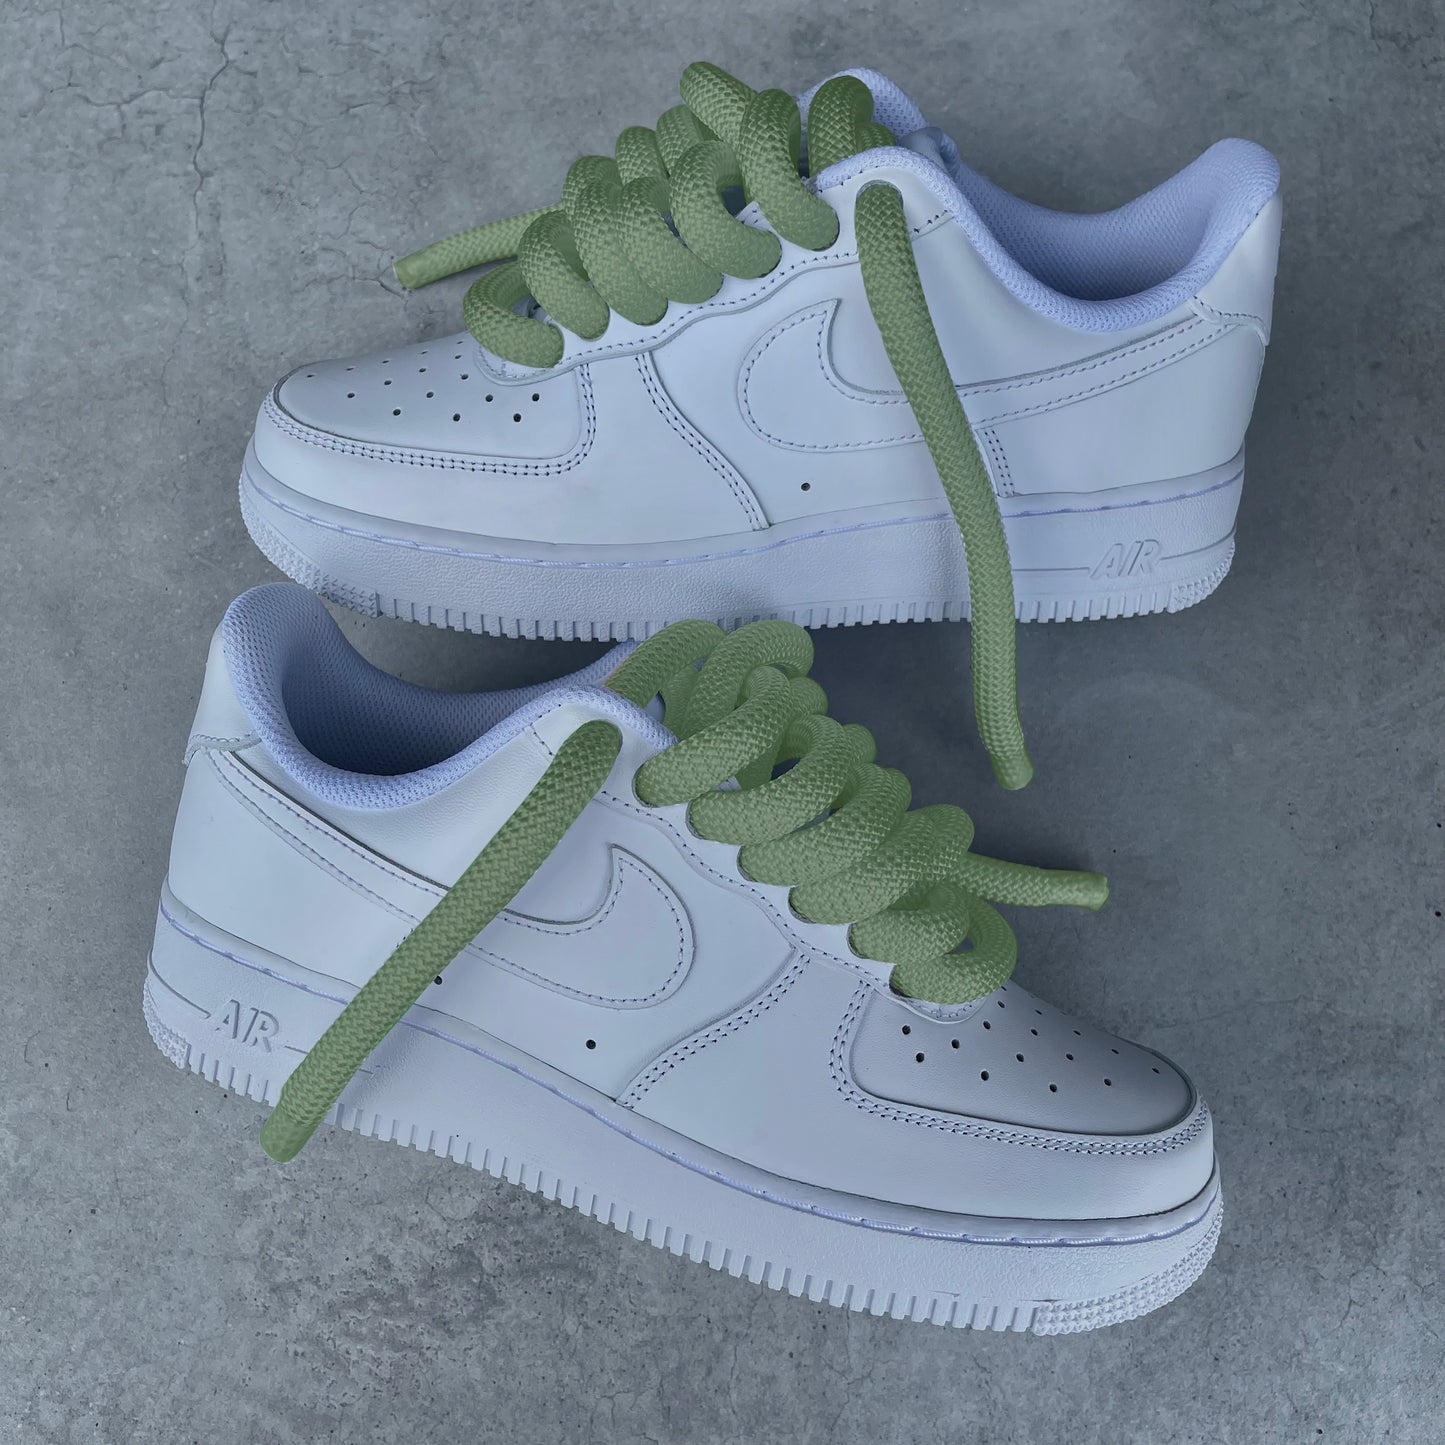 Custom AIR FORCE 1 - Rope laces 2.0 (olive green)